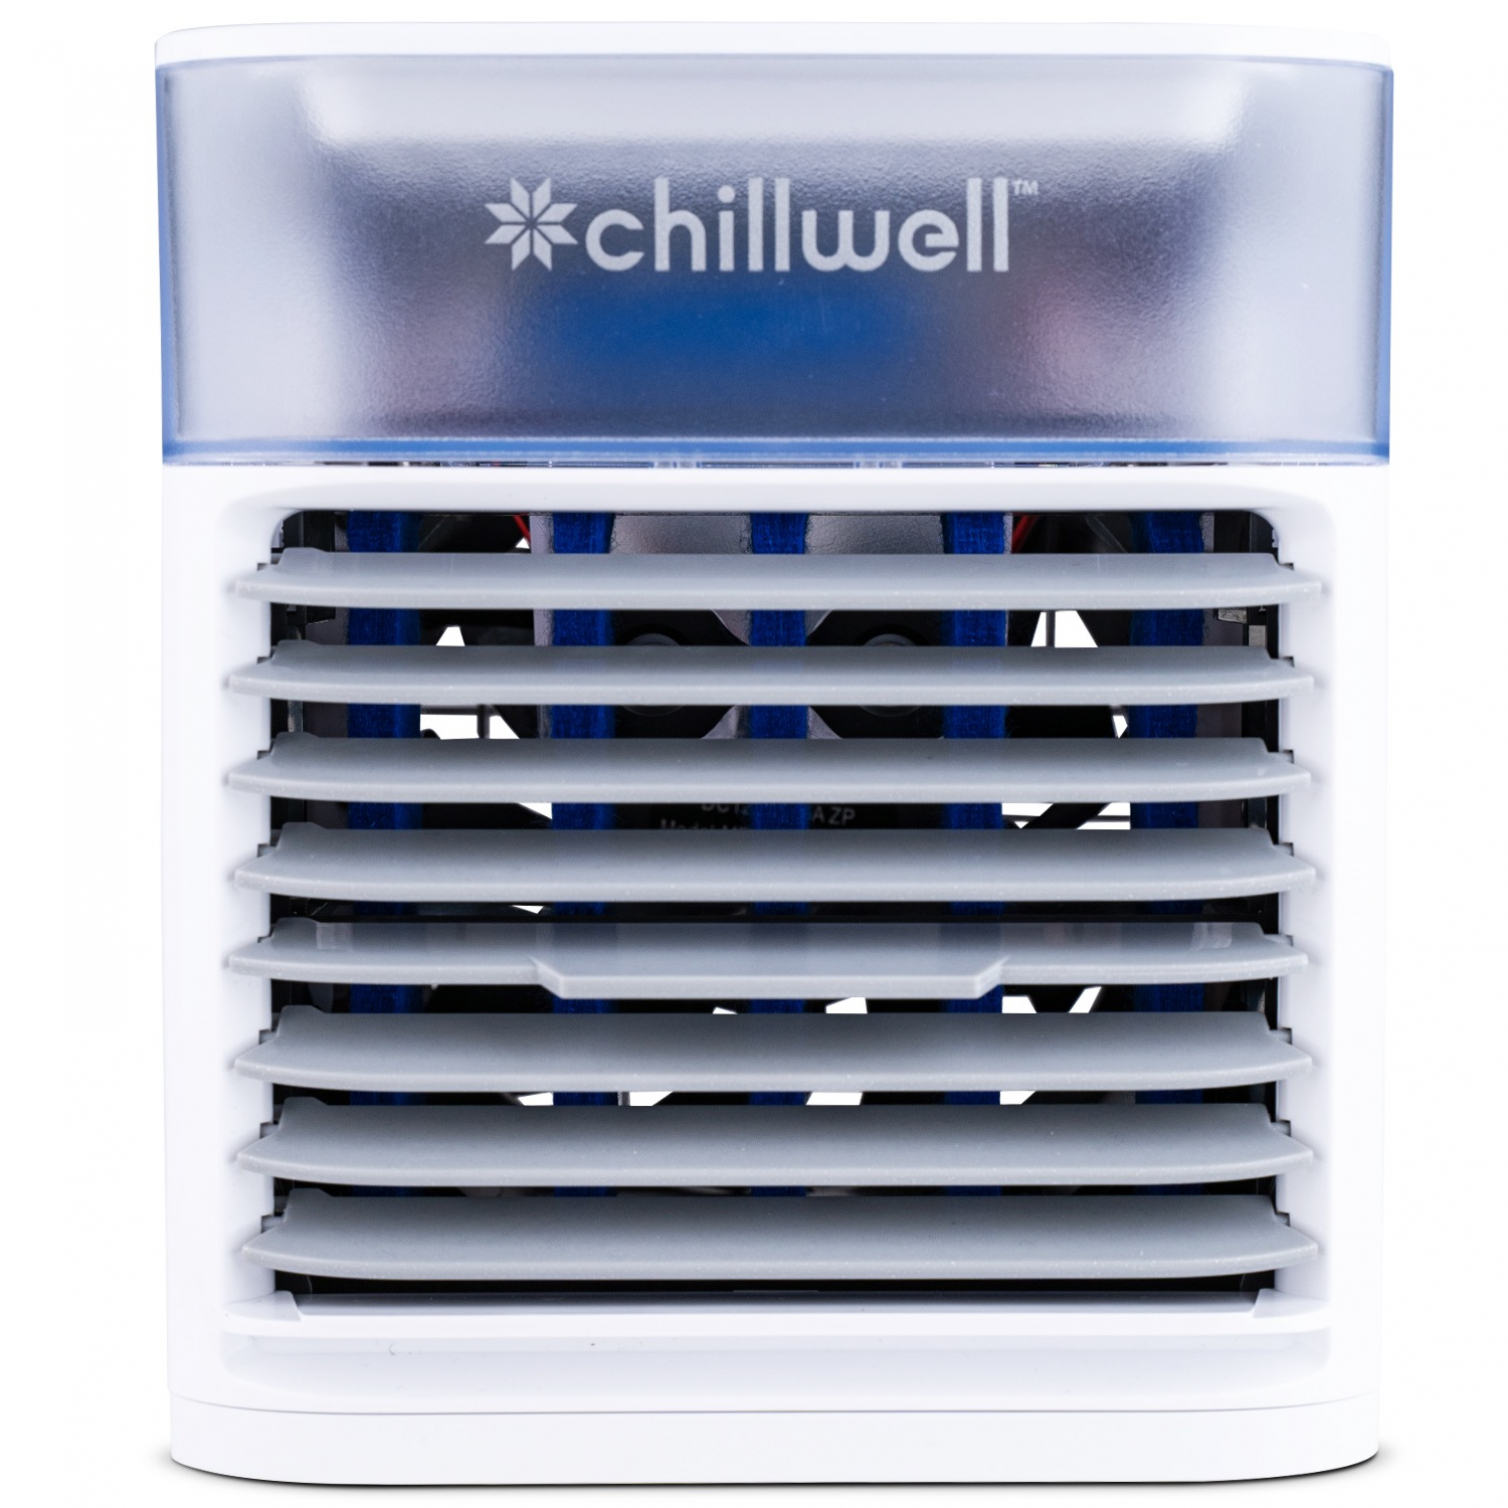 Chillwell AC Promotional Code